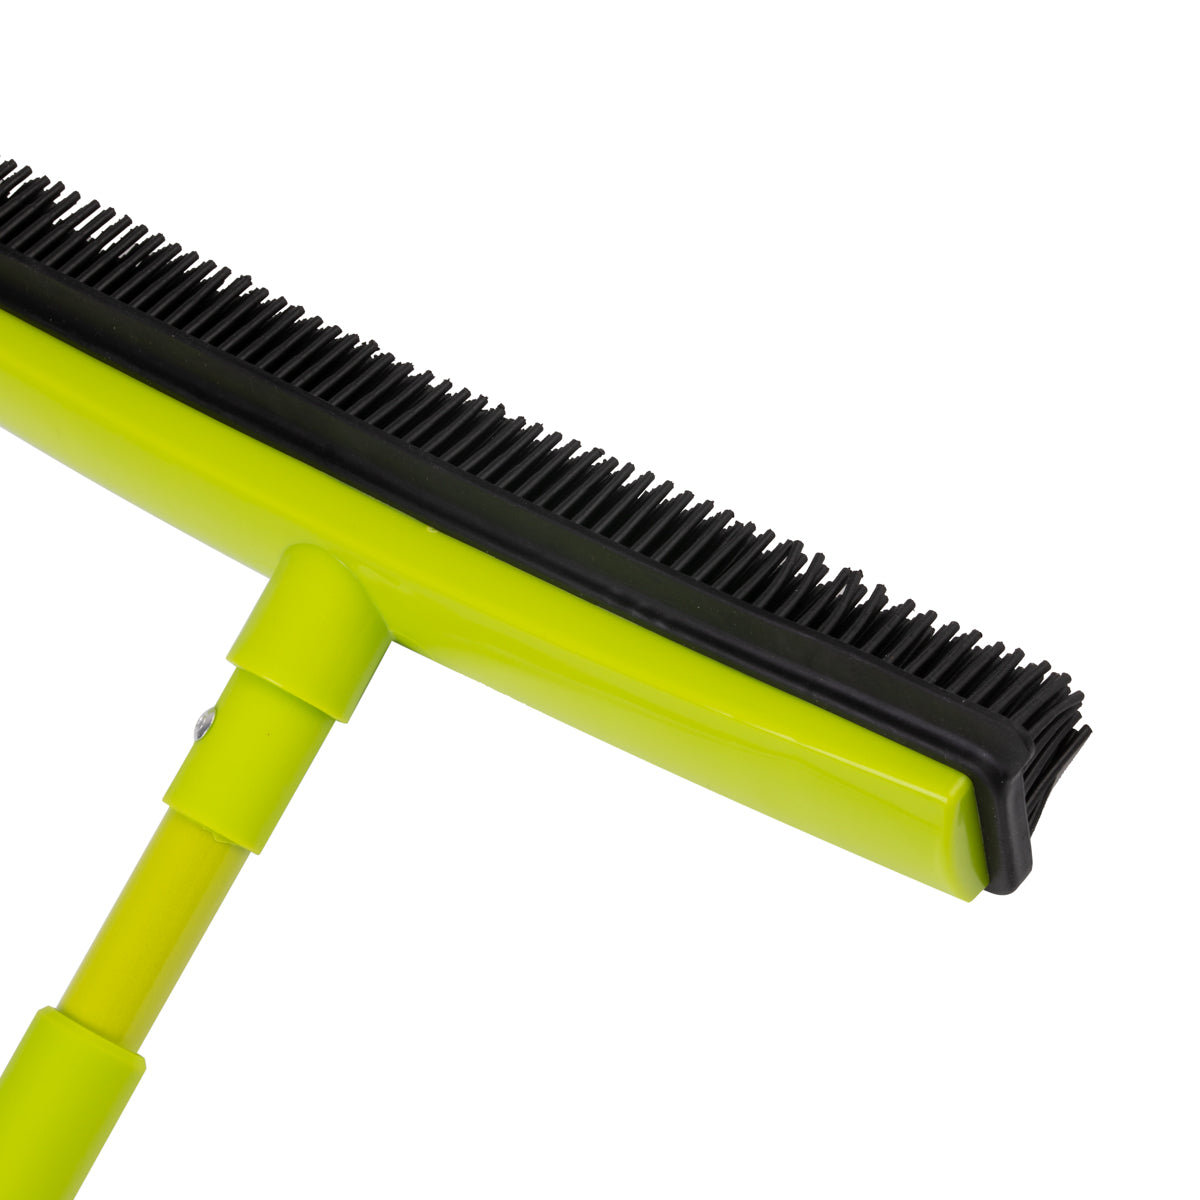 Rubber barber's broom with a telescopic handle